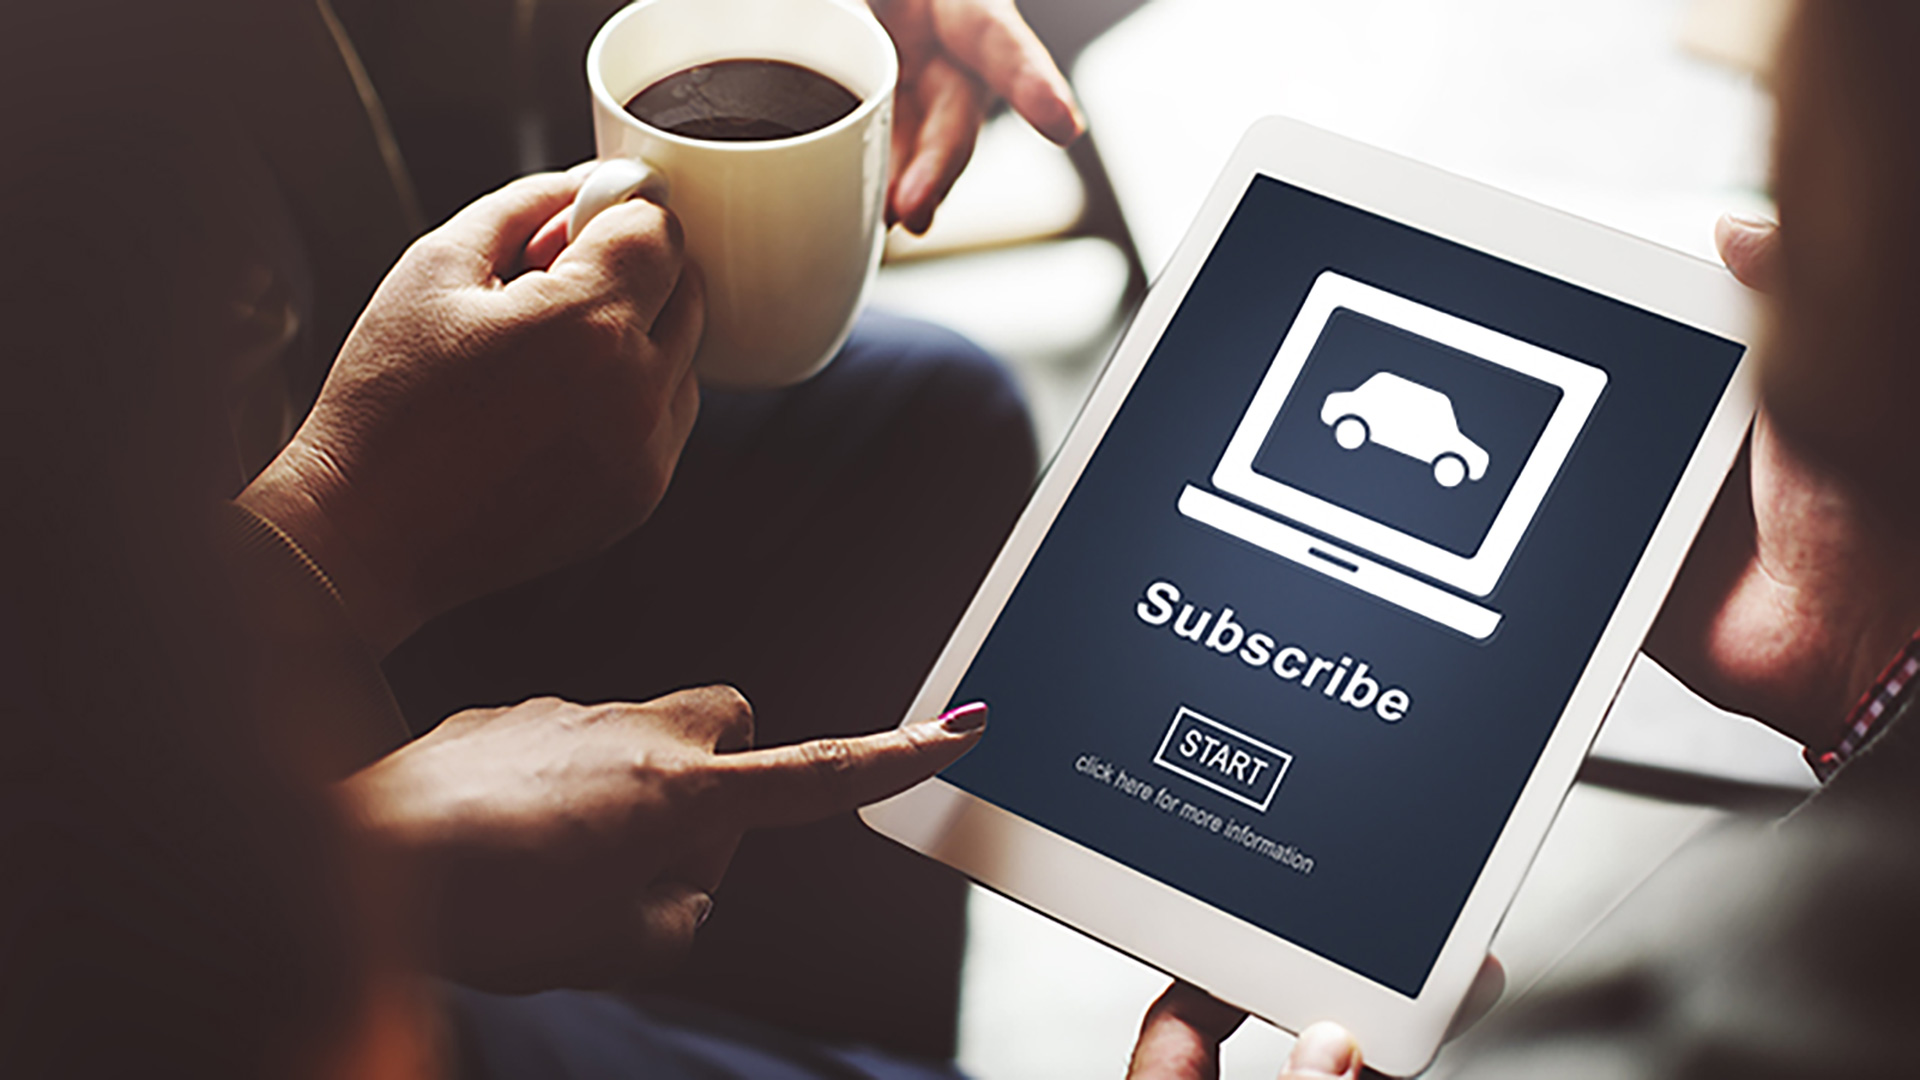 Subscribe car on tablet